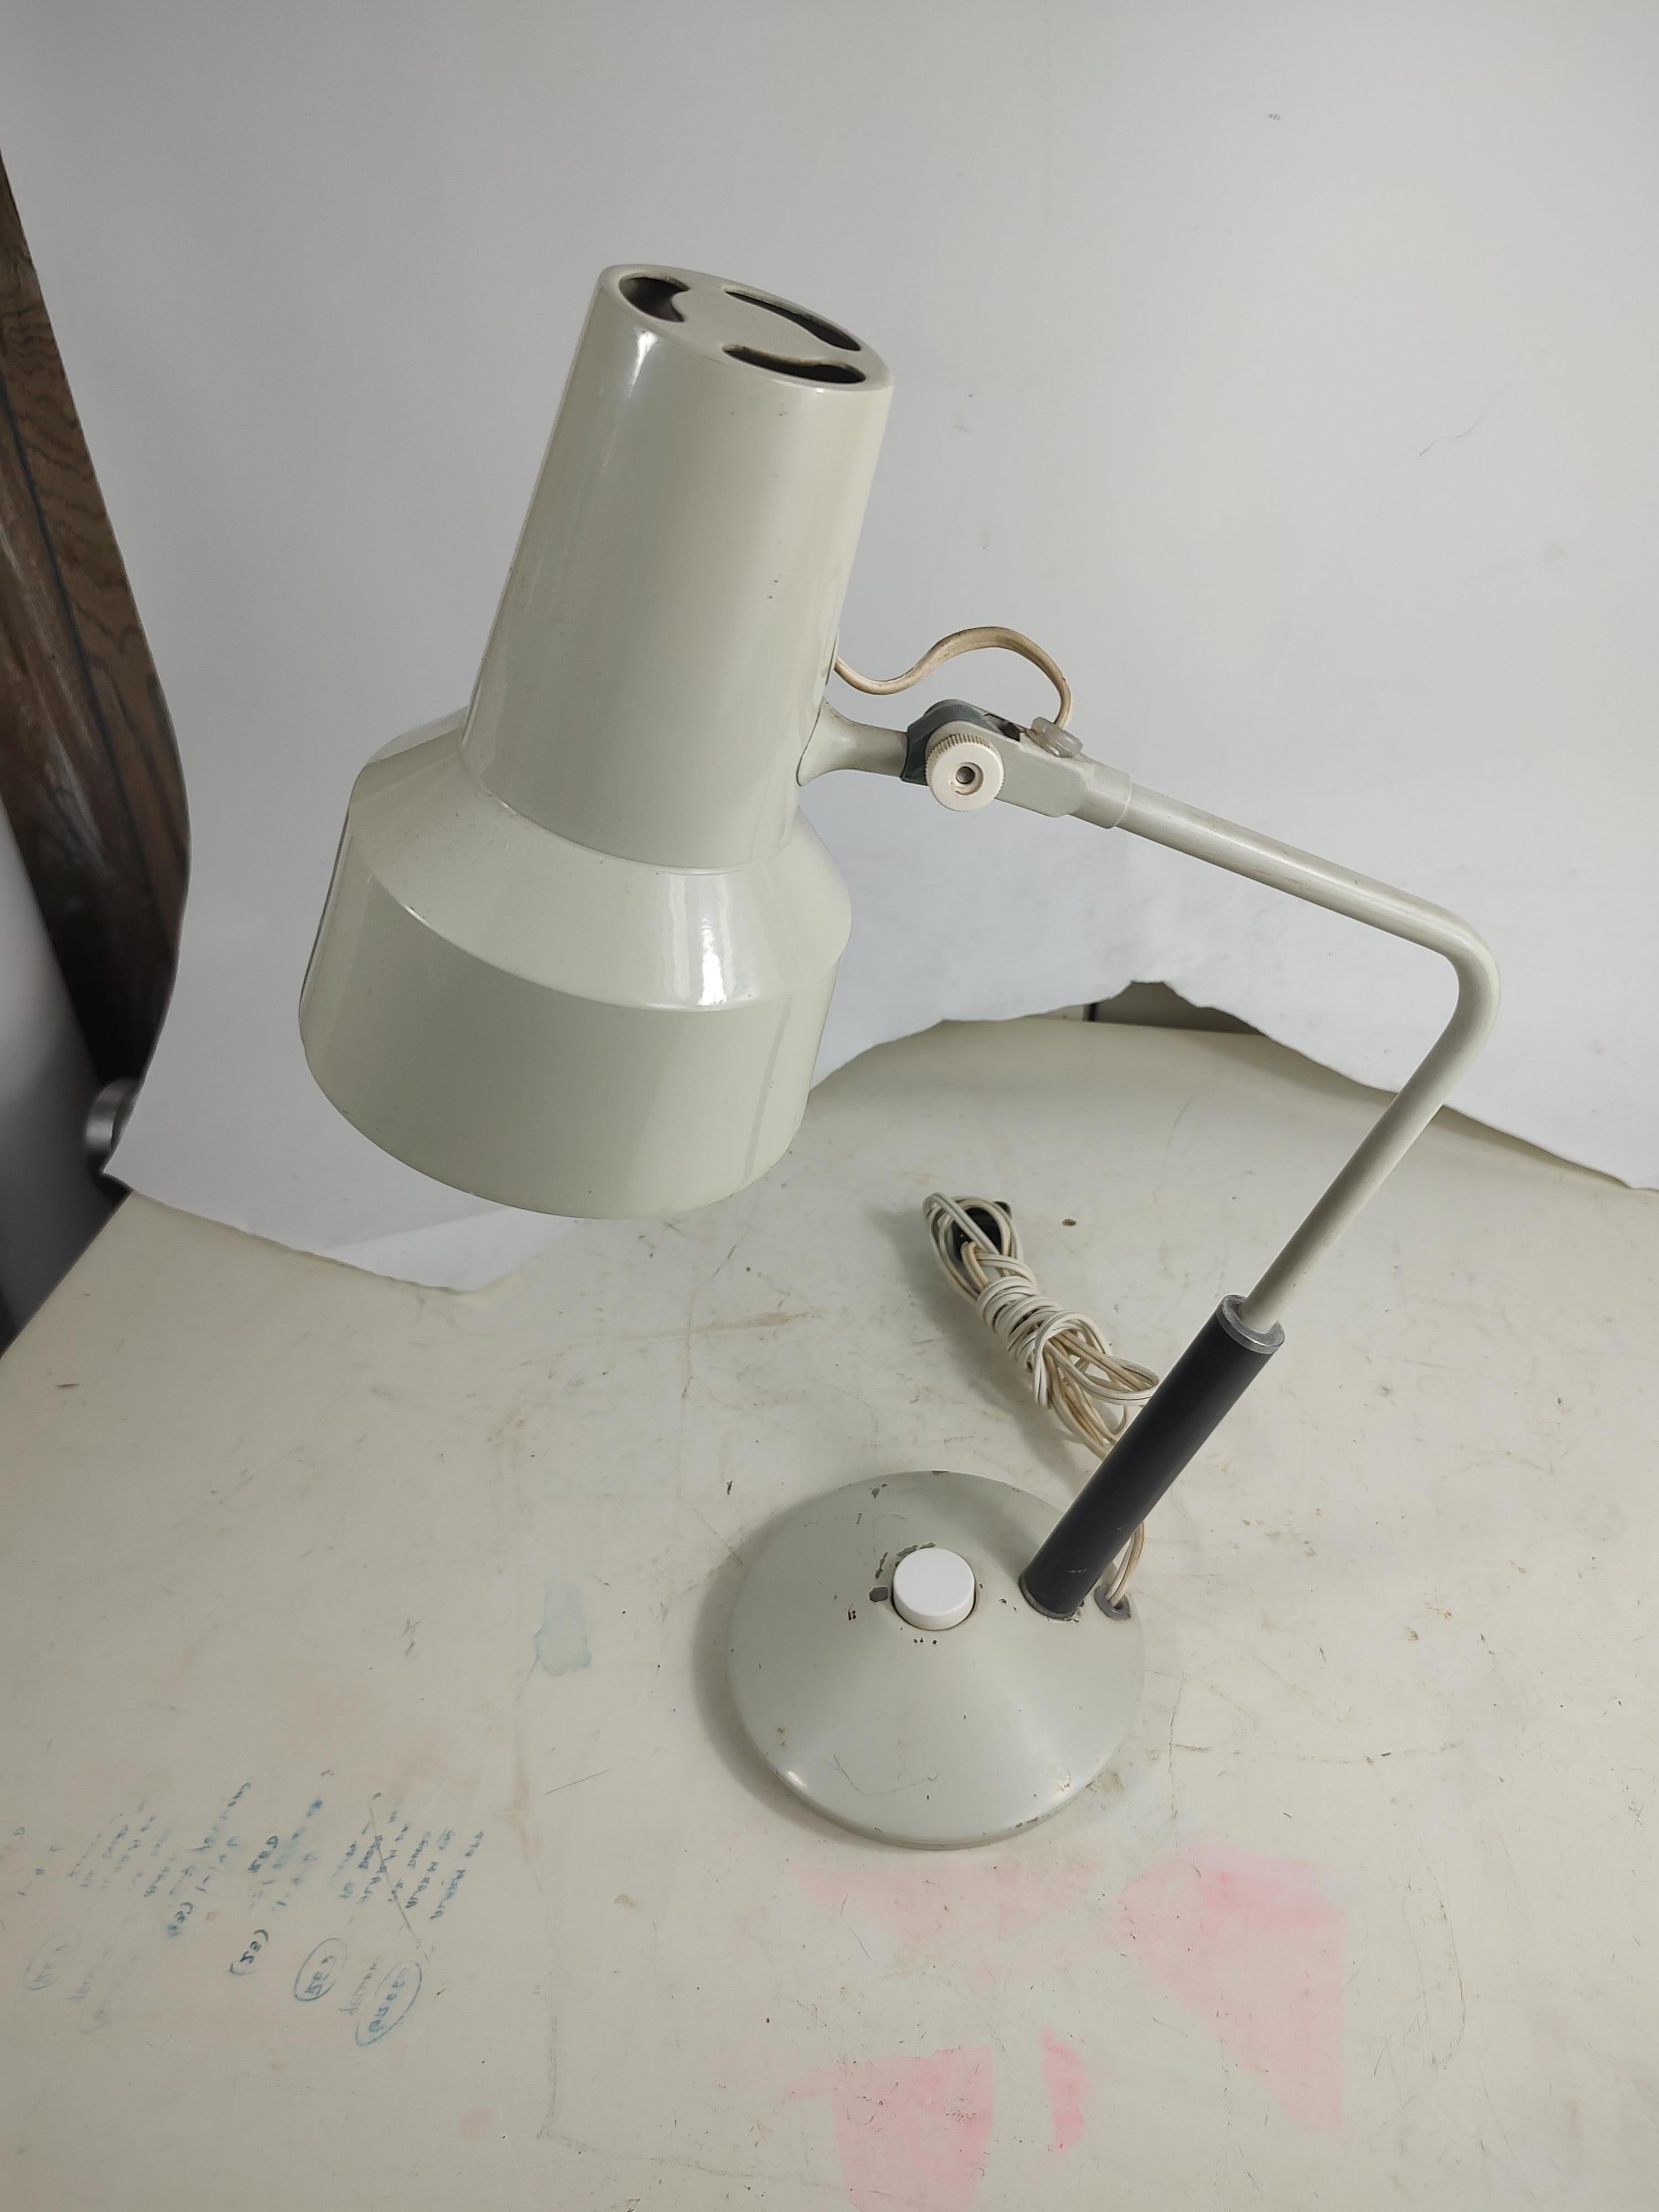 Diminutive table desk lamp in white by Luxo. Fully adjustable. Designed by Jack Jacobsen. In very good condition with minimal wear. See pics.